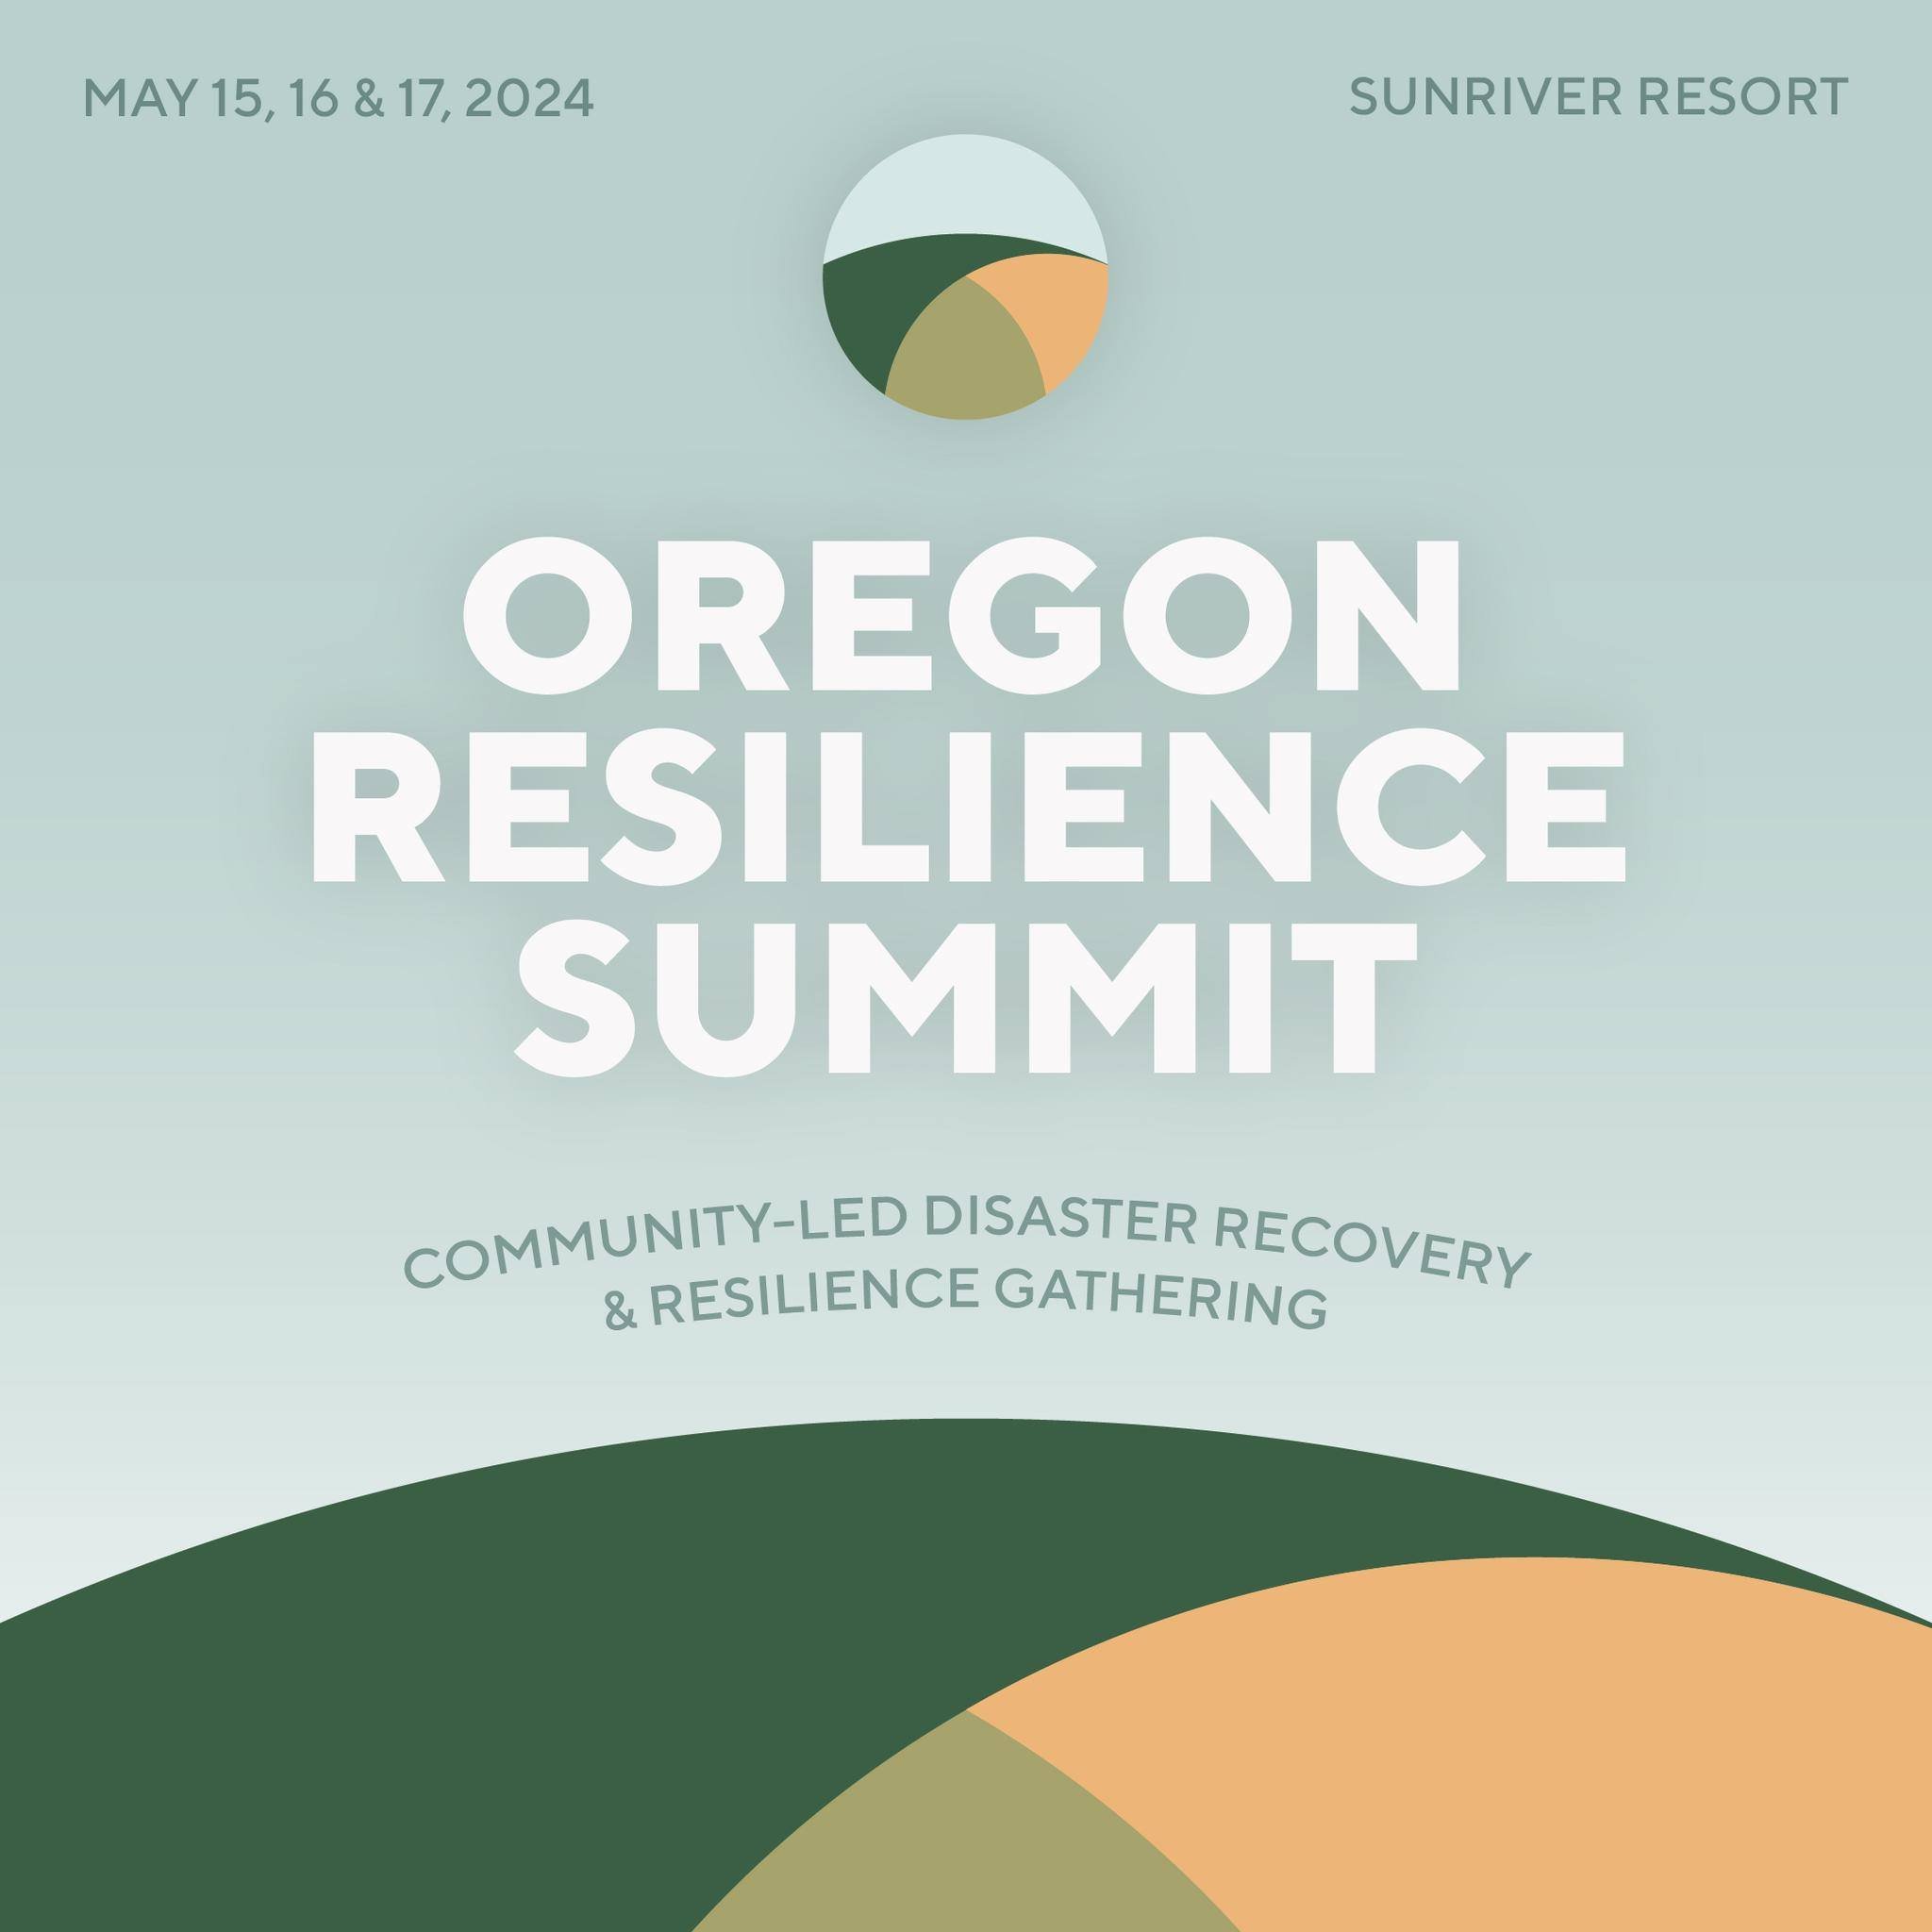 Join us at the Oregon Resilience Summit, May 15-17, in Sunriver, OR, as we gather to share experiences and insights from the 2020 Labor Day fires. Together&mdash;we'll learn, grow, and build stronger communities.

The Oregon Resilience Summit will be